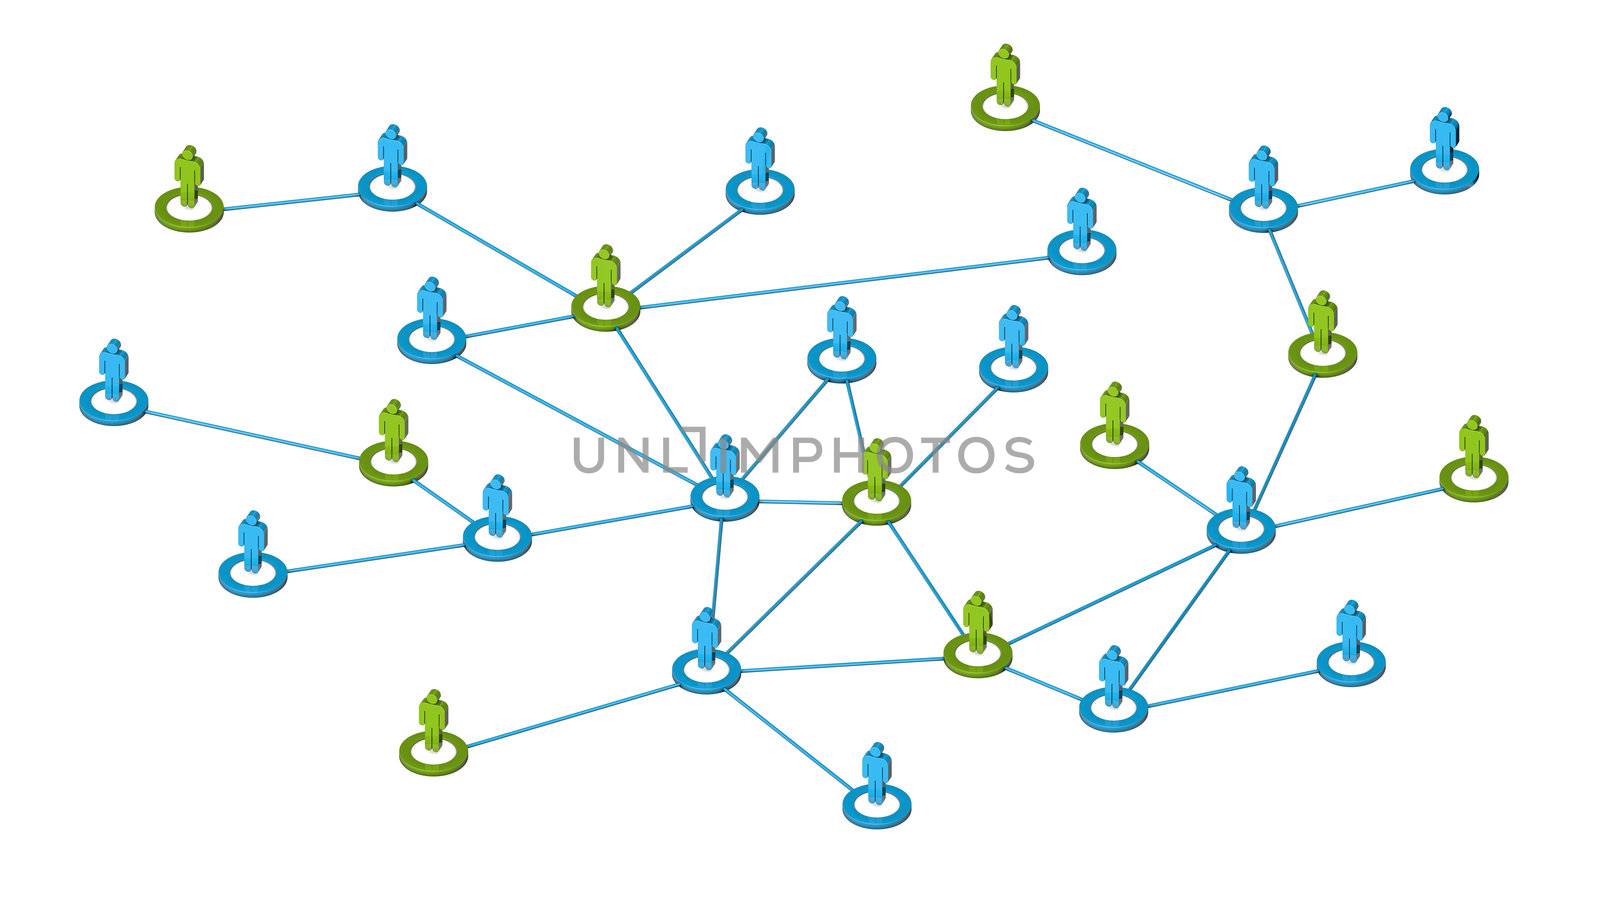 Social network connections by bloomua